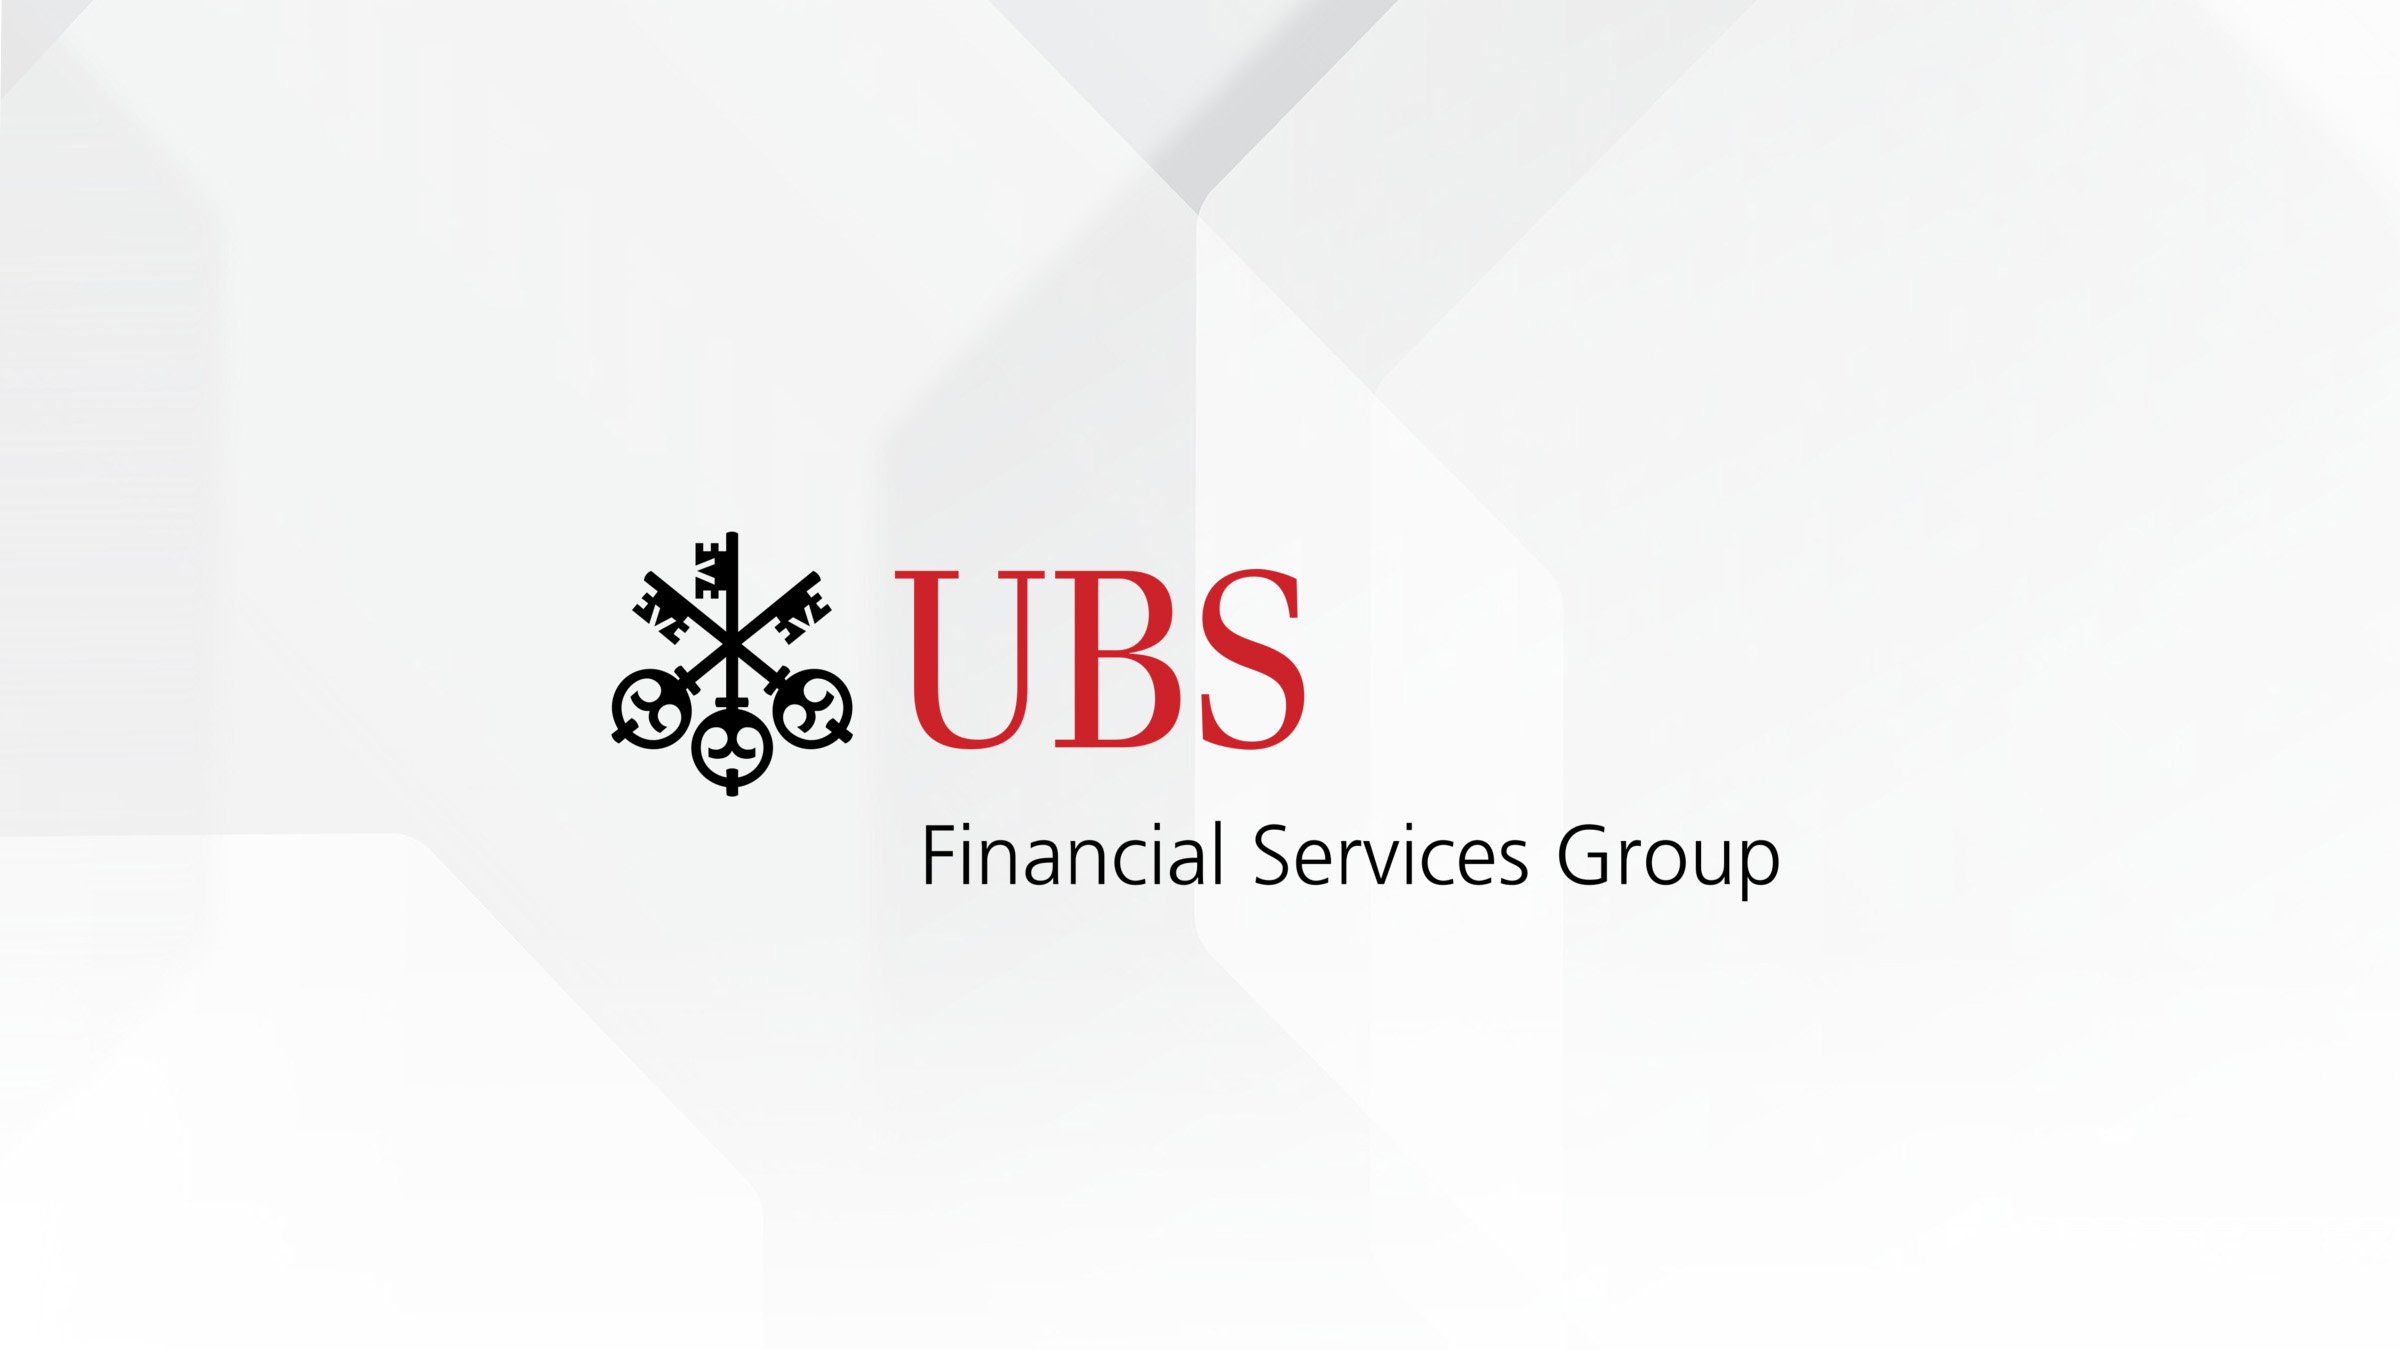 UBS Global Industrials and Transportation Conference